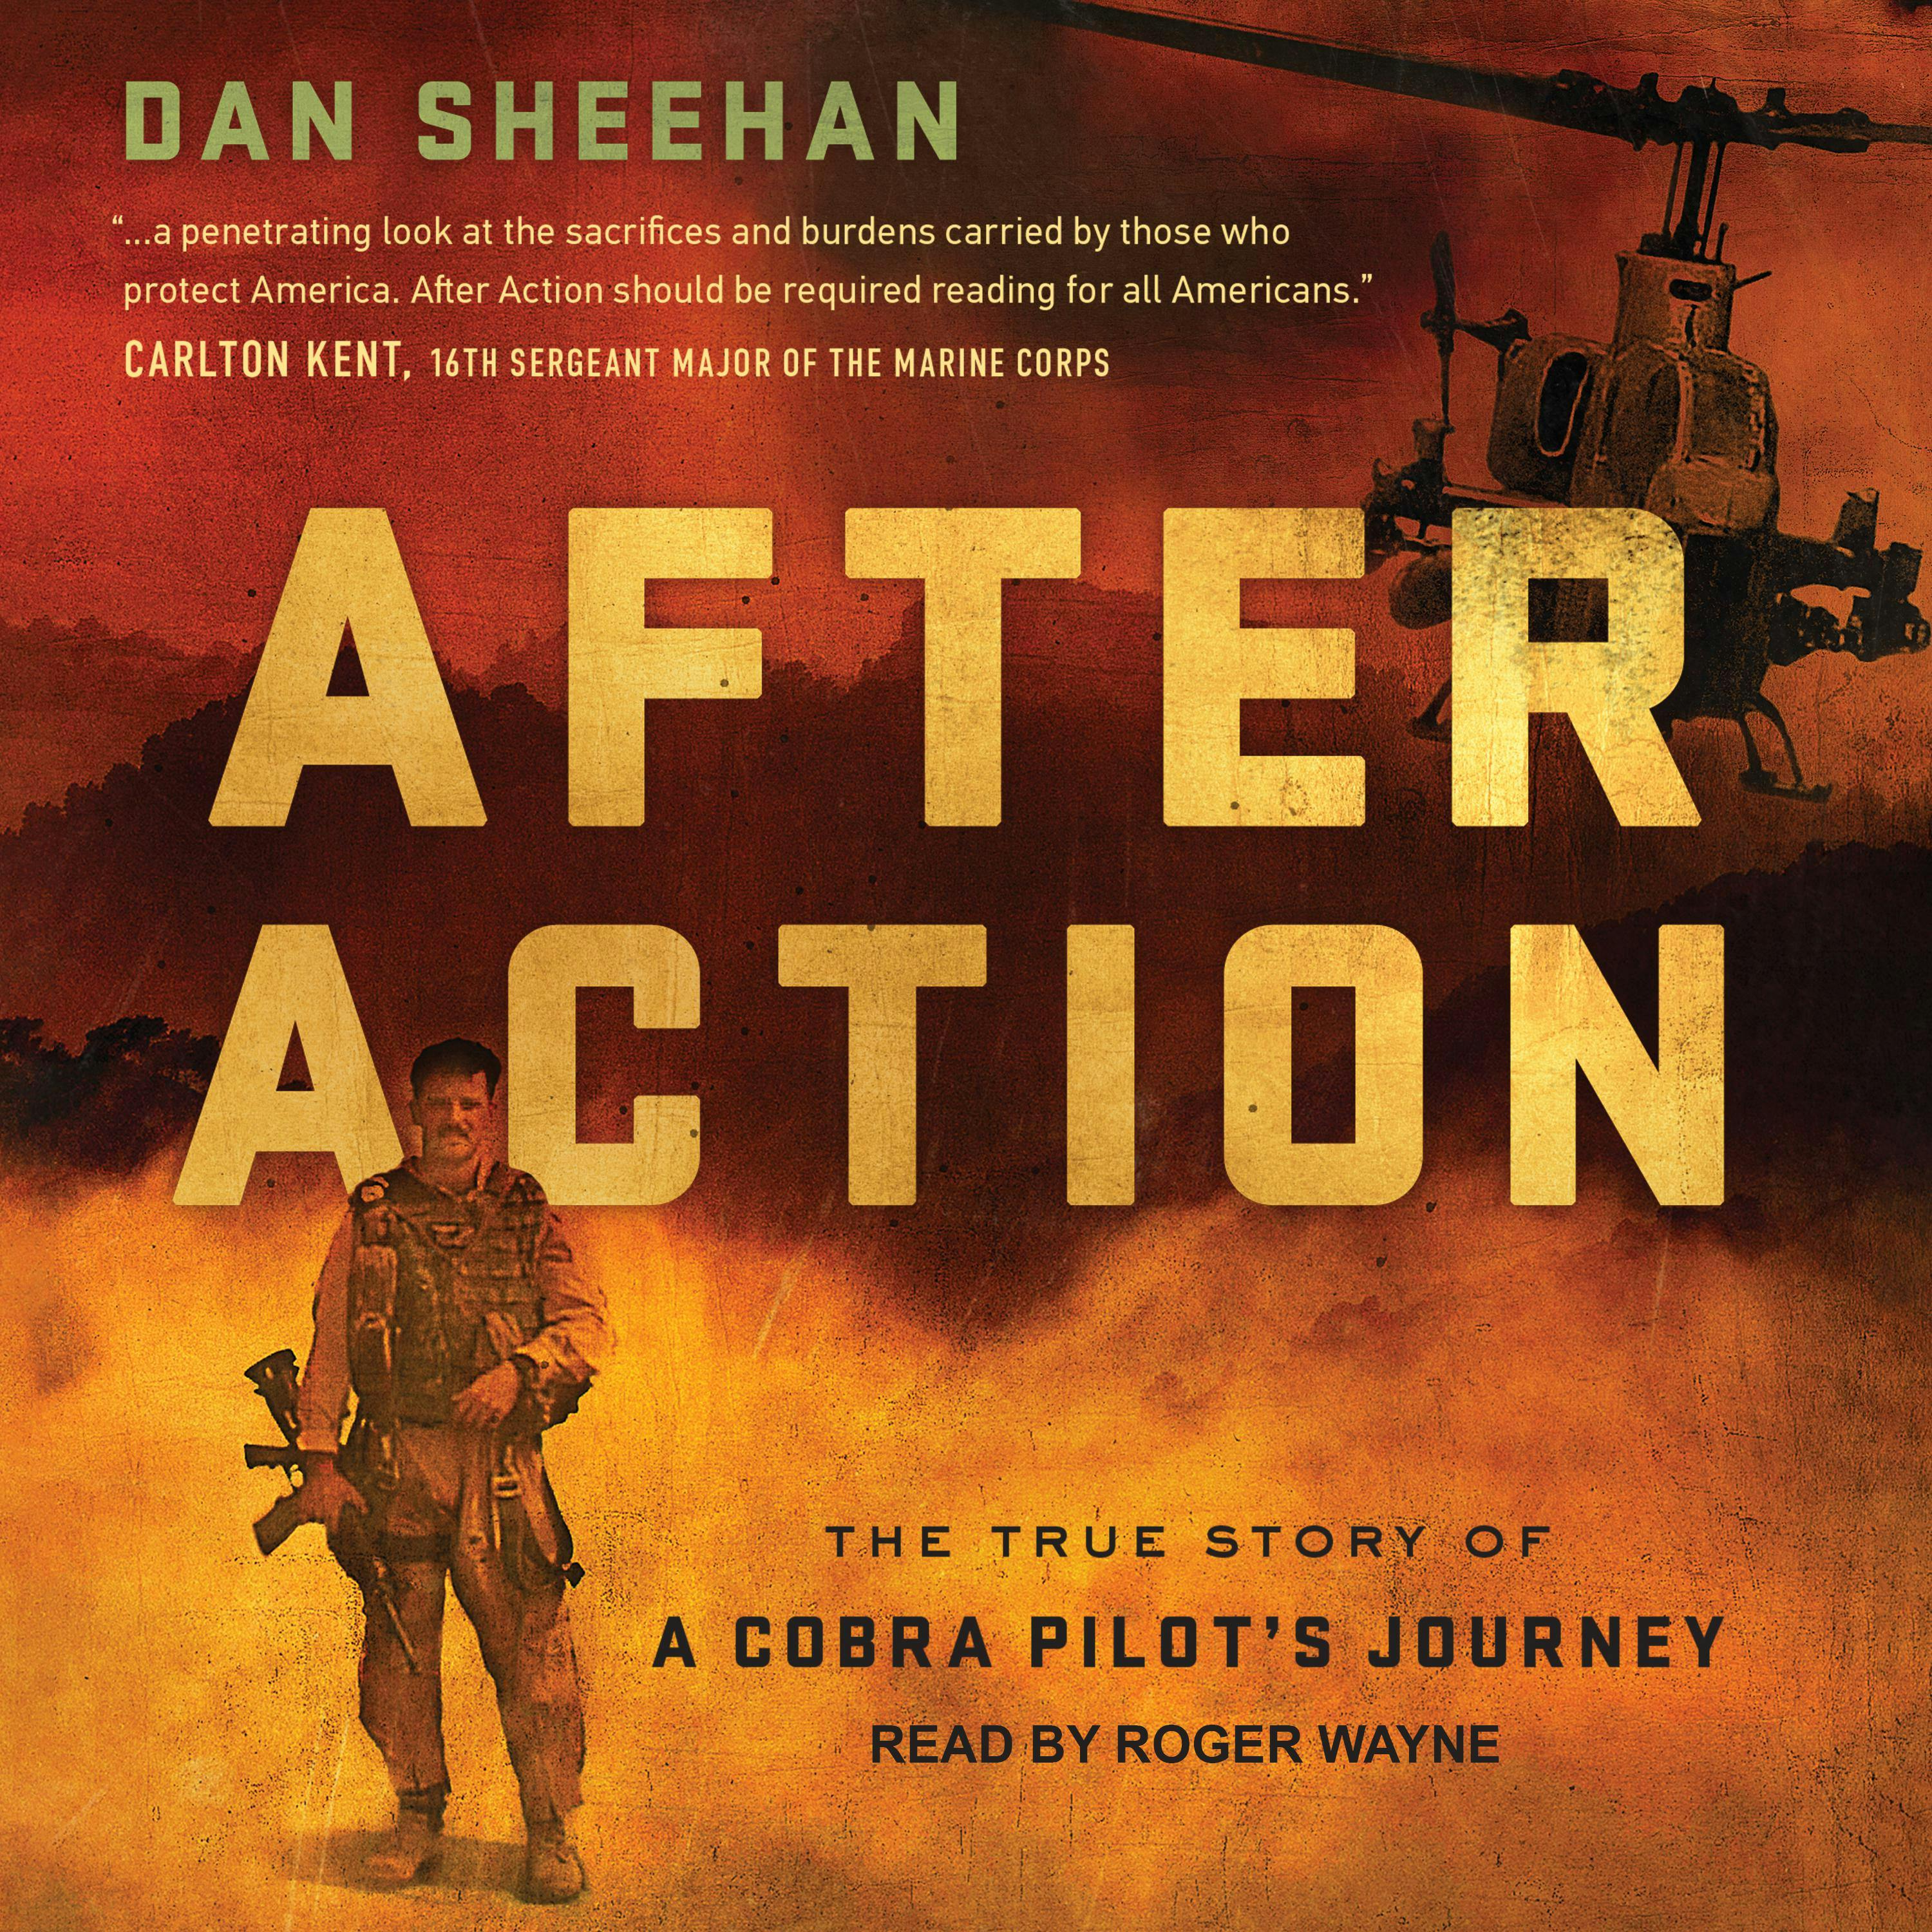 After Action: The True Story of a Cobra Pilot's Journey - Dan Sheehan